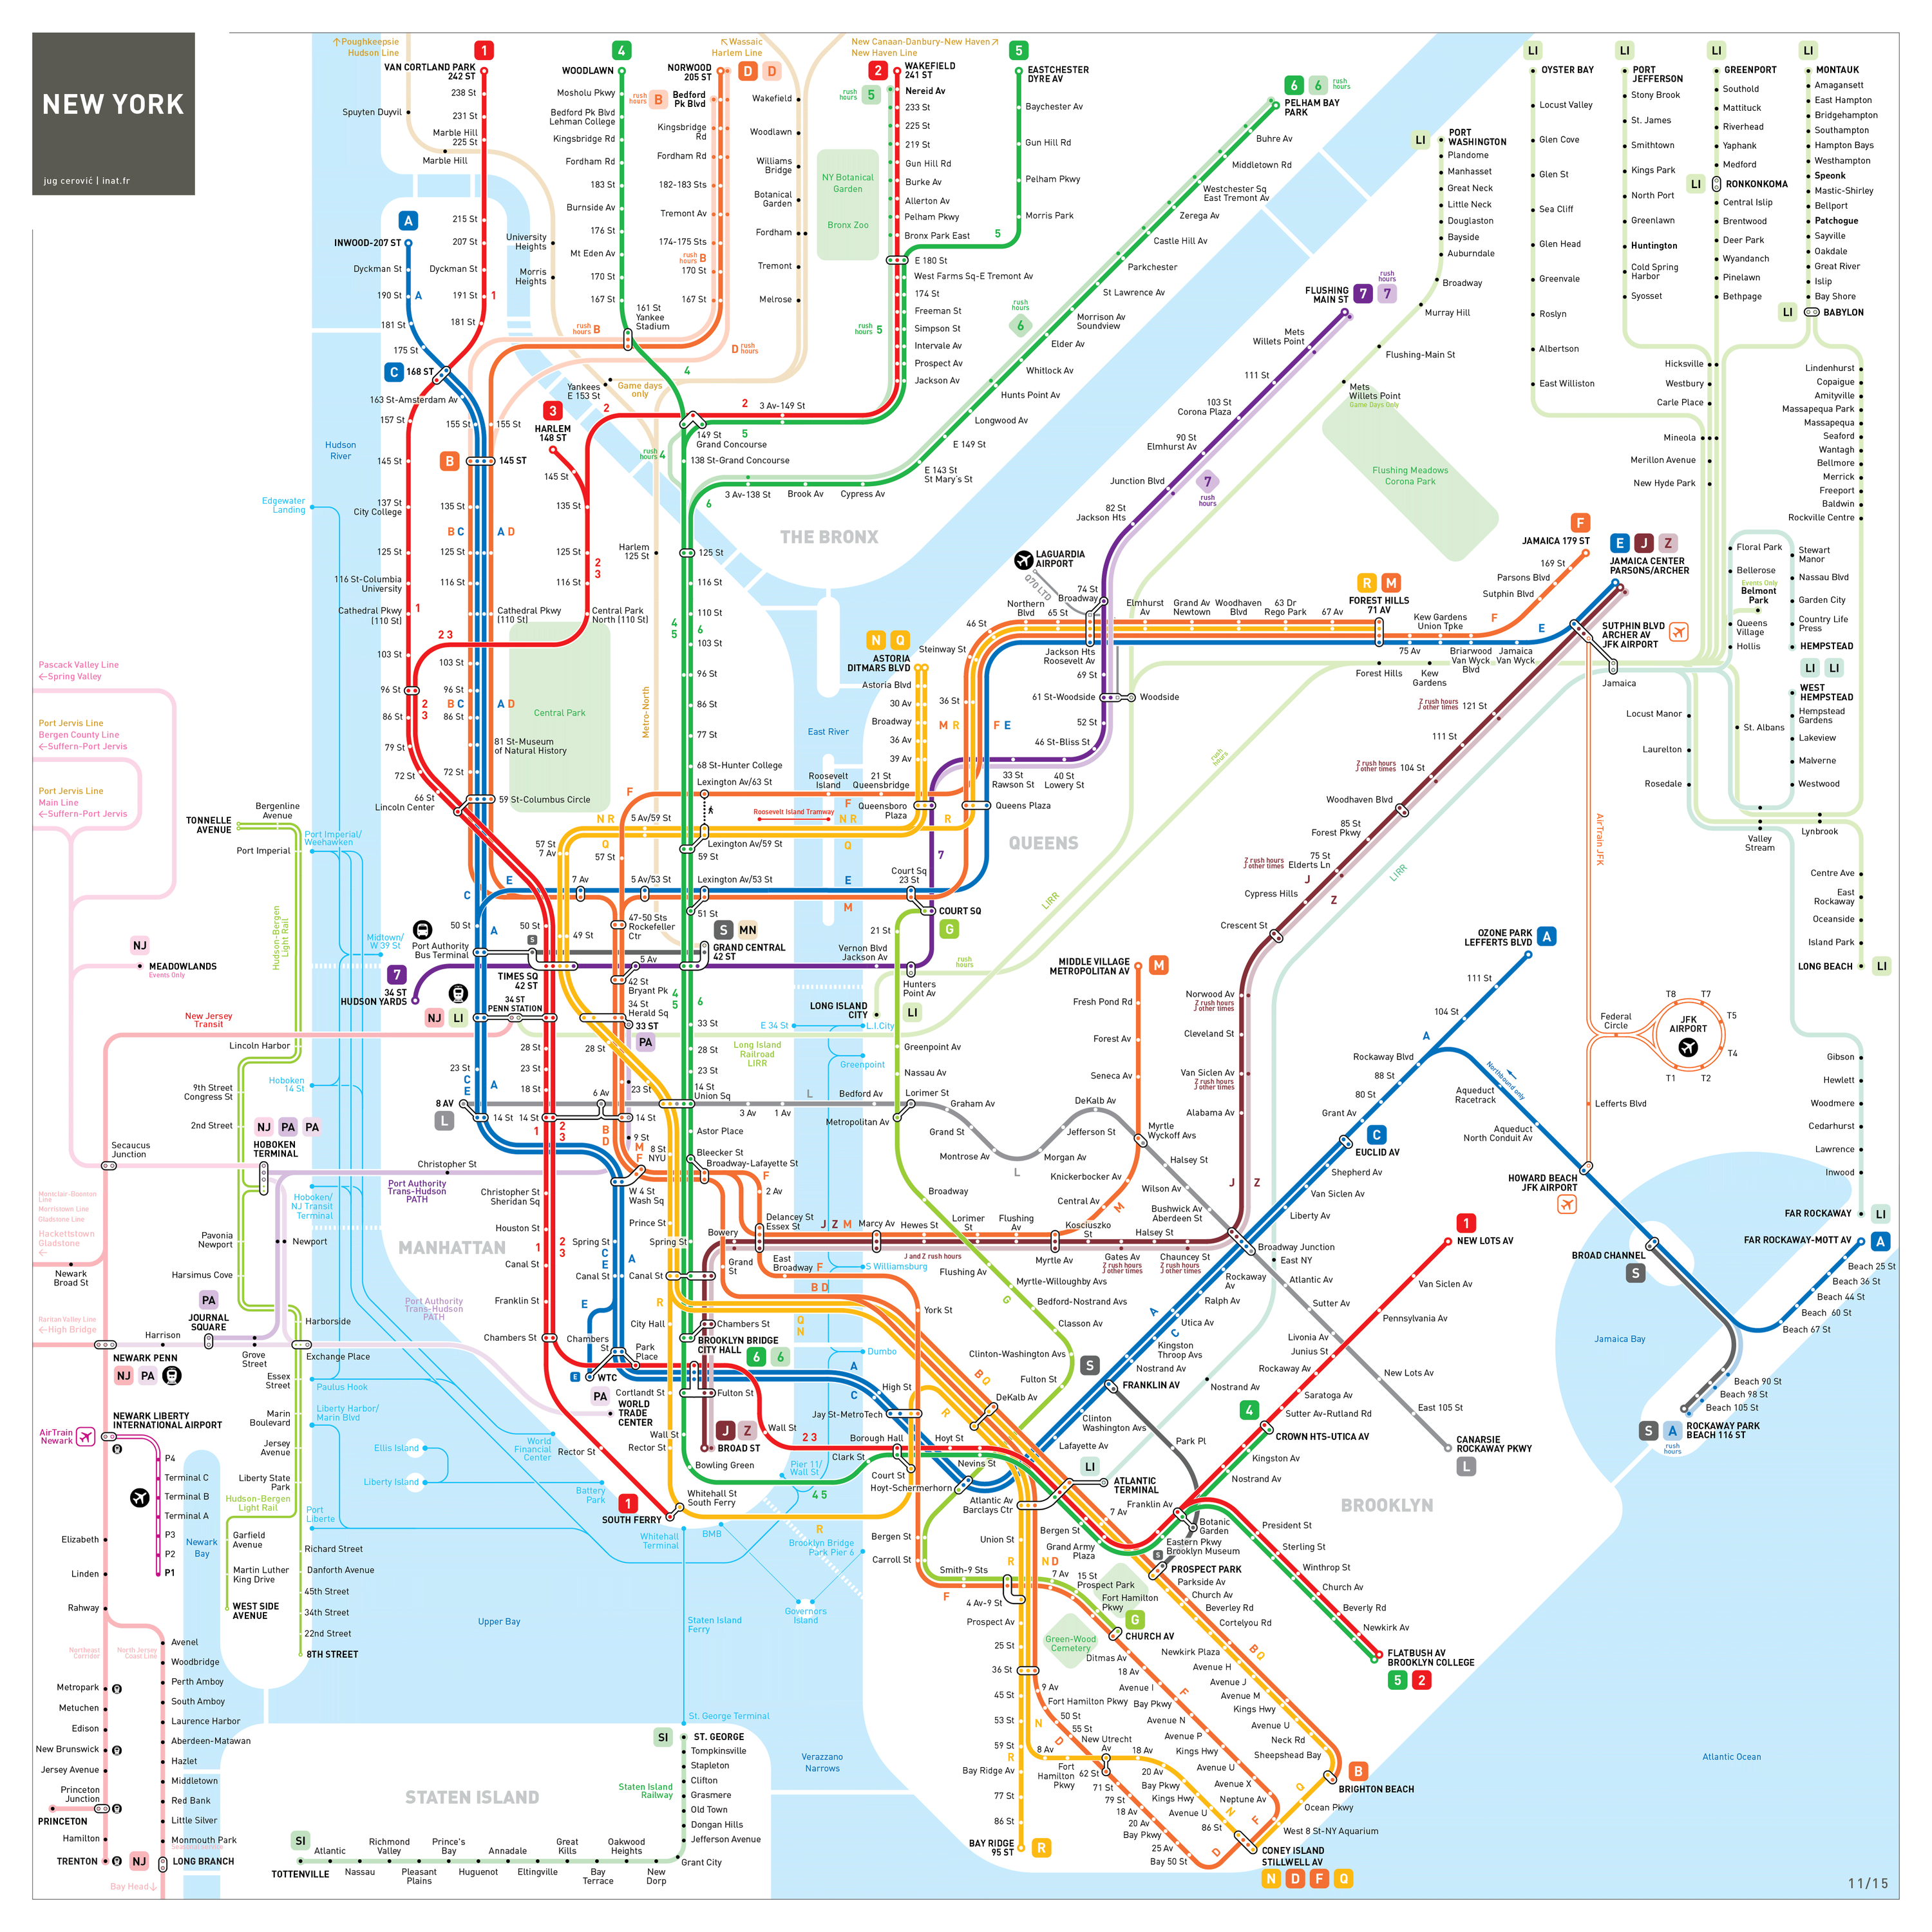 kiddingnotkidding: 4 nyc subway maps that are actually easier to